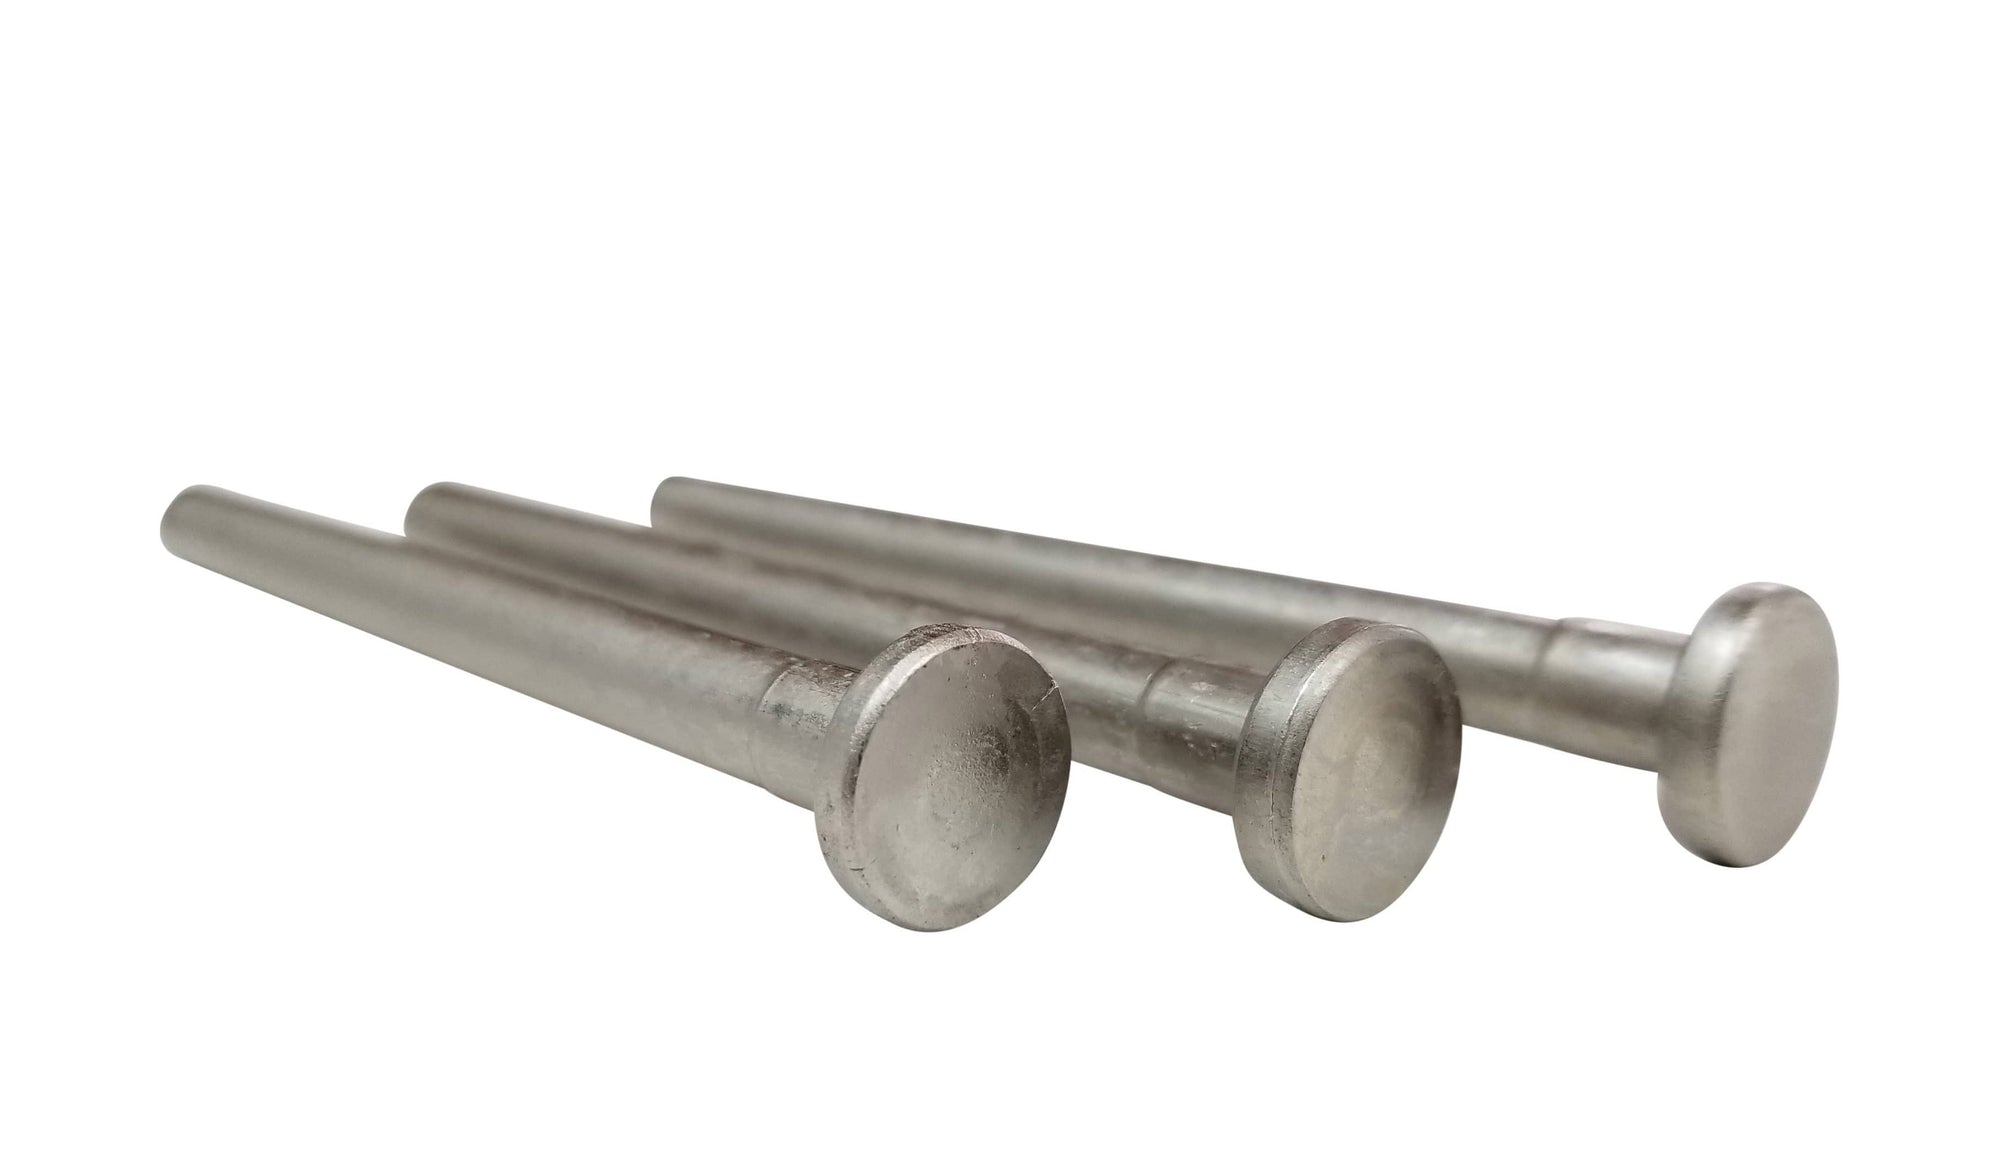 Commercial Grade Hinge Pins For Doors - Satin Nickel - 4 Inch Or 4.5 Inch - 3 Pack